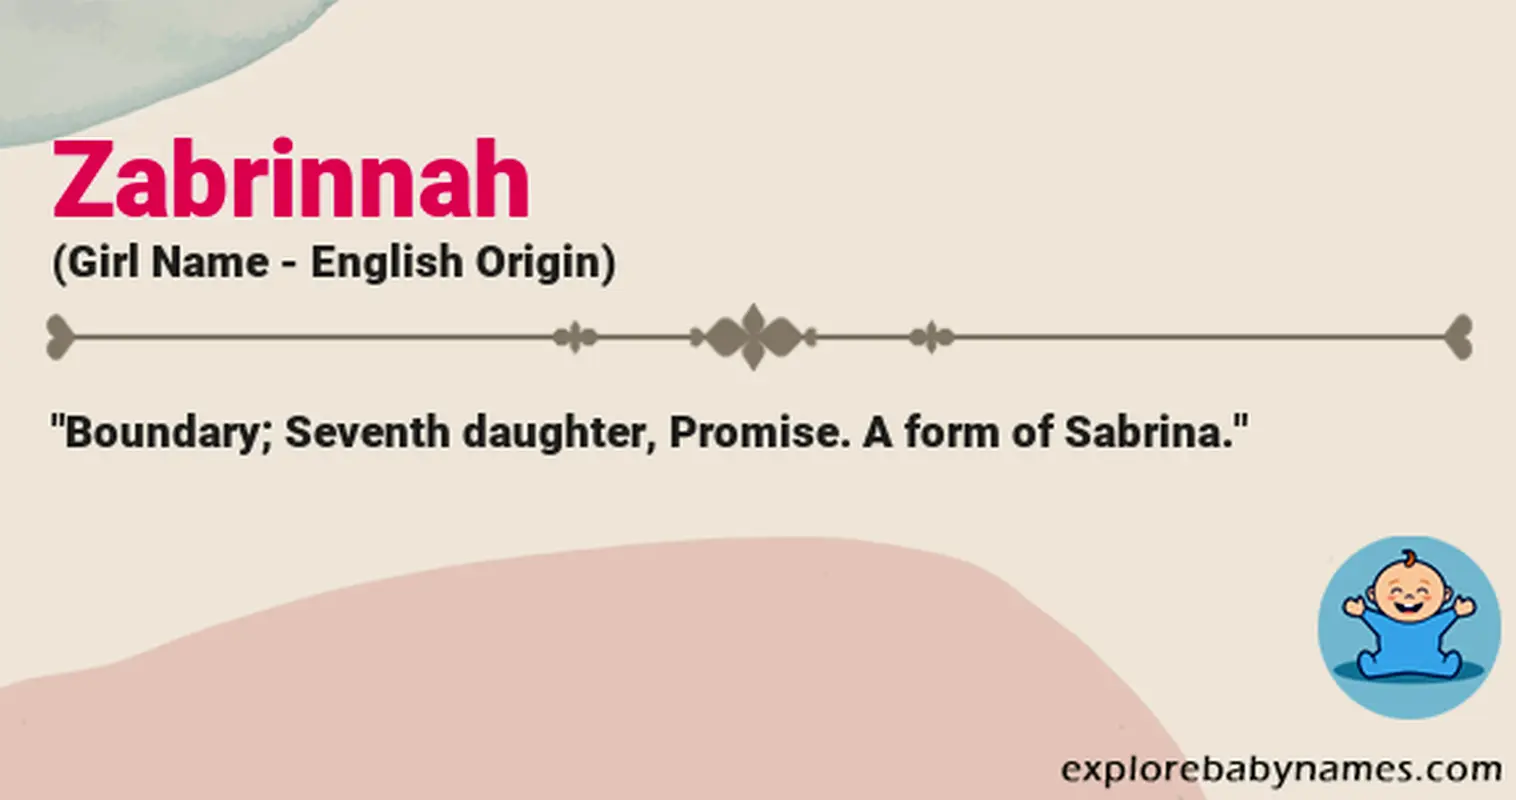 Meaning of Zabrinnah